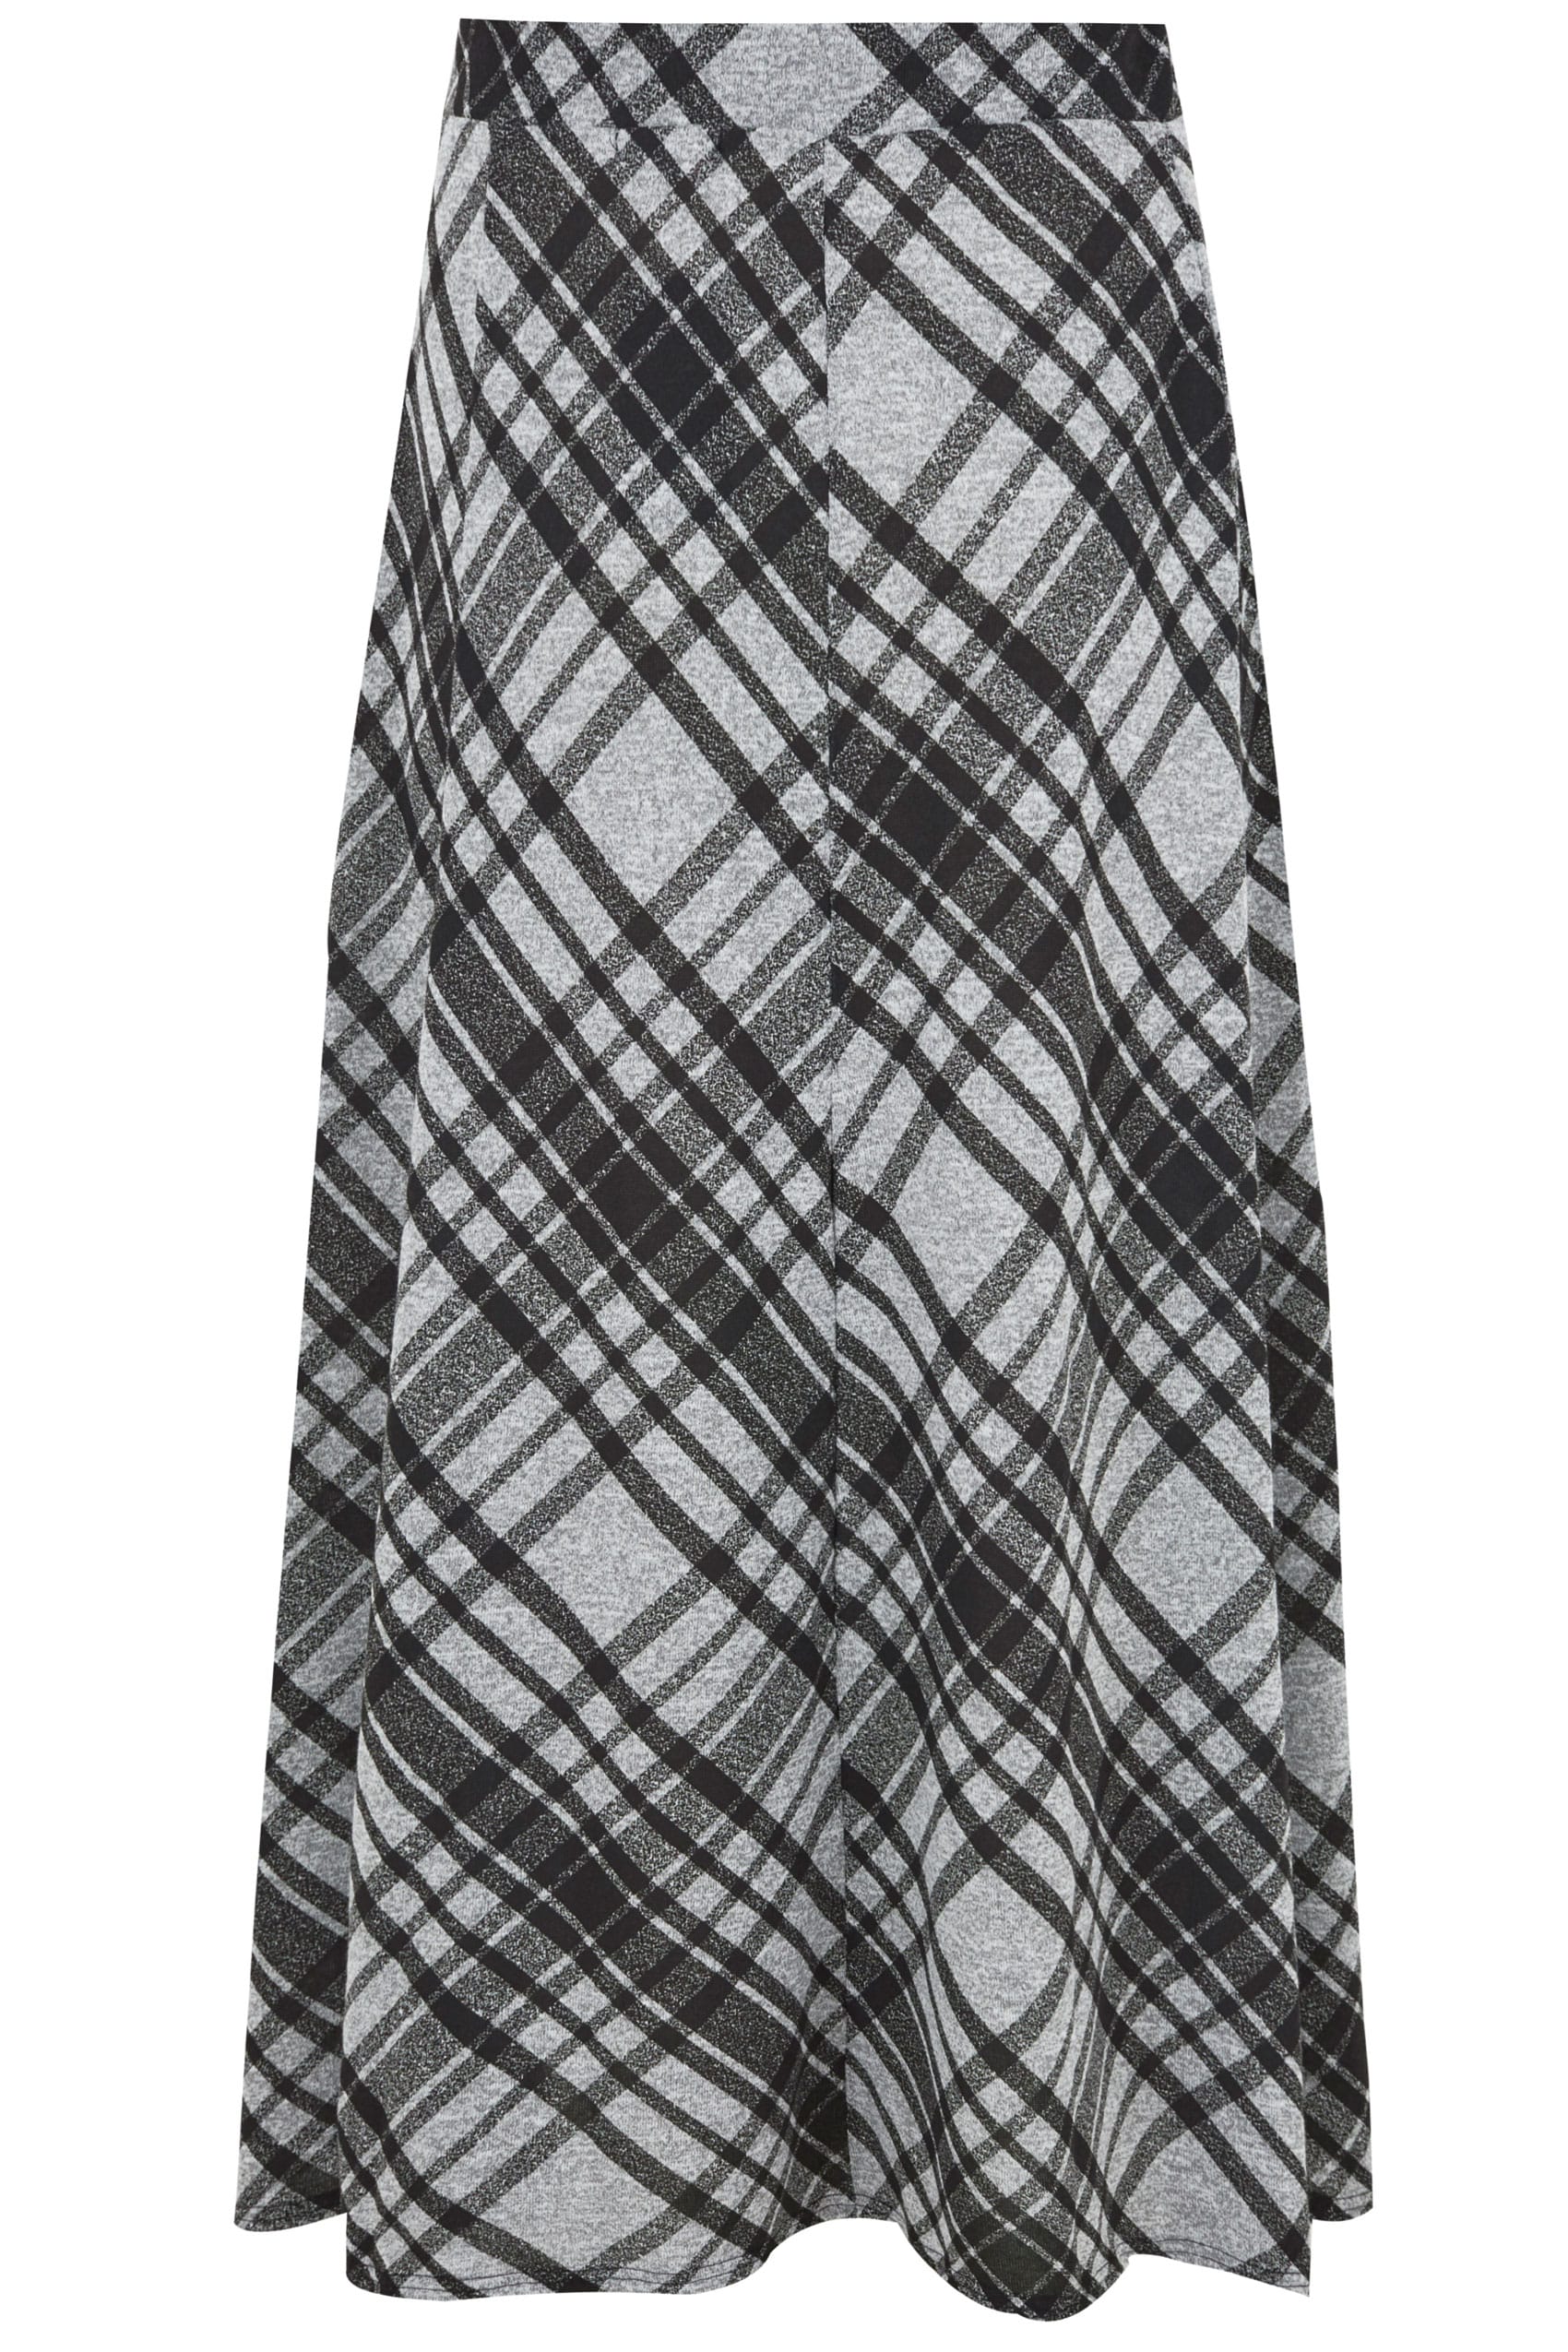 Black & Grey Checked Maxi Skirt, Plus size 16 to 36 | Yours Clothing